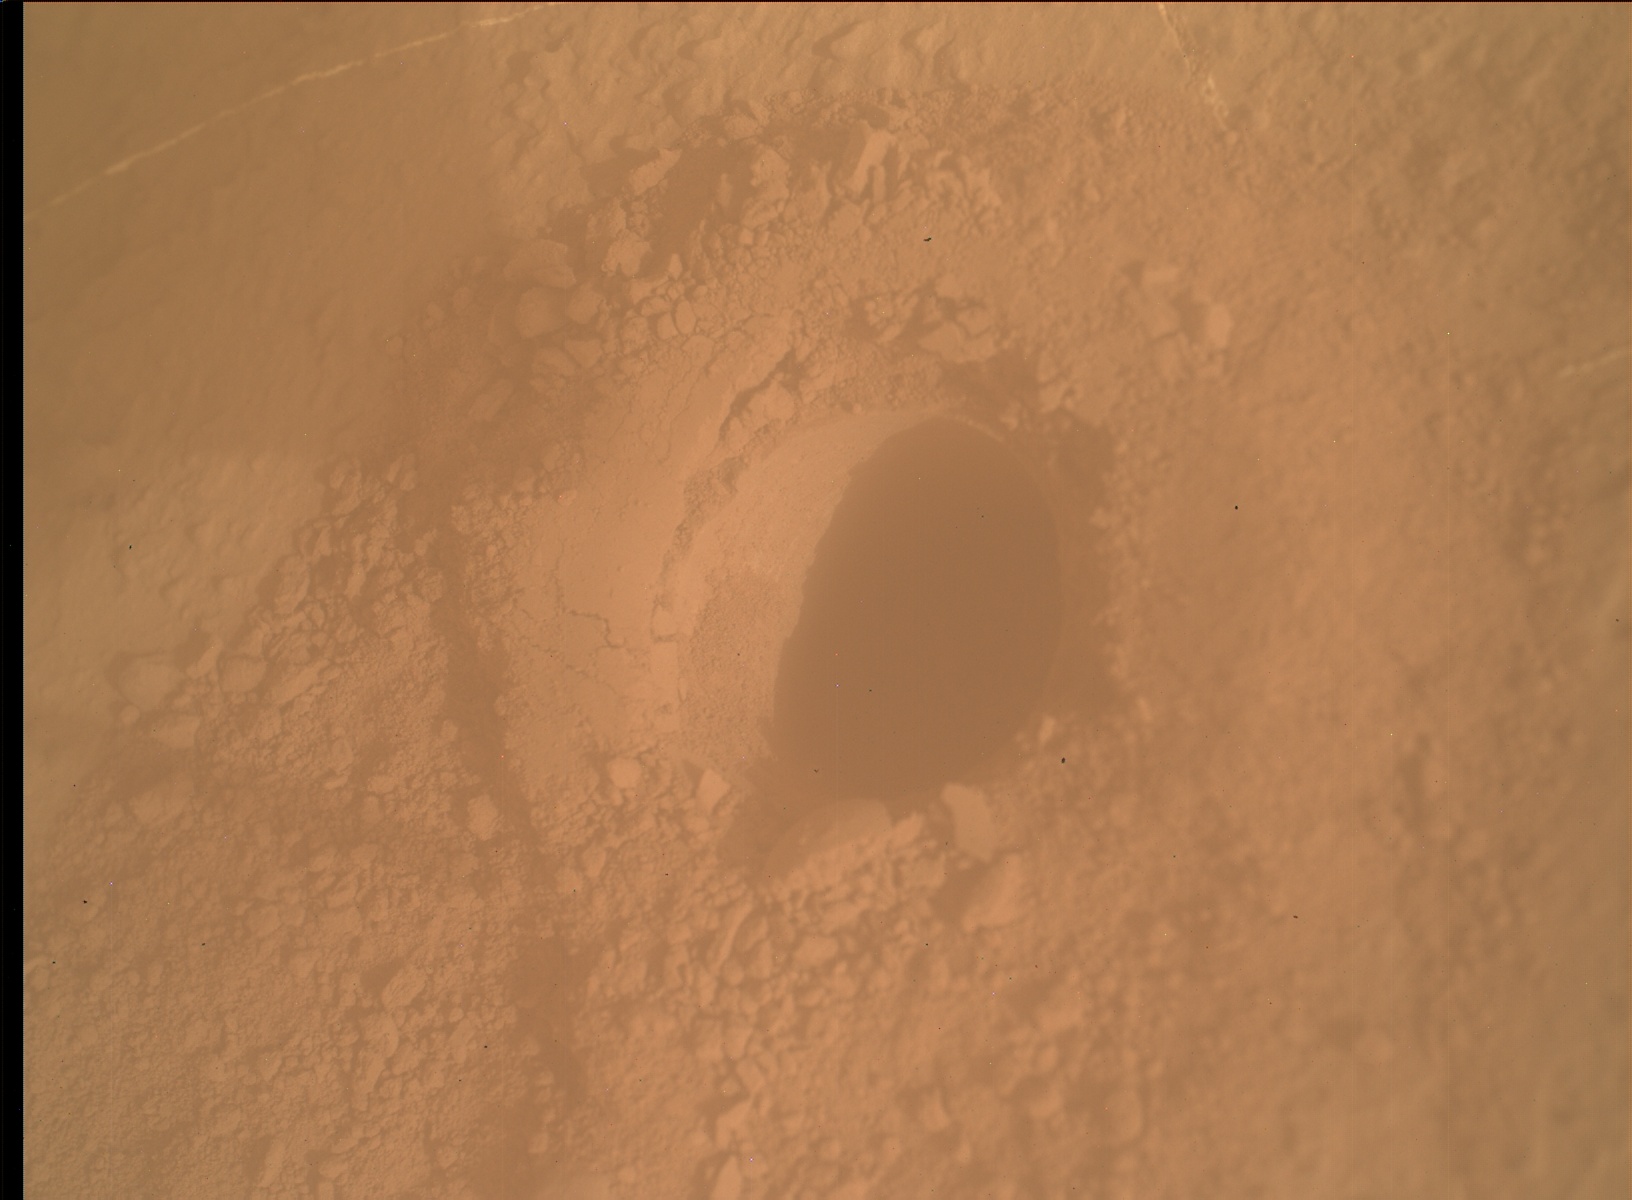 Nasa's Mars rover Curiosity acquired this image using its Mars Hand Lens Imager (MAHLI) on Sol 1496